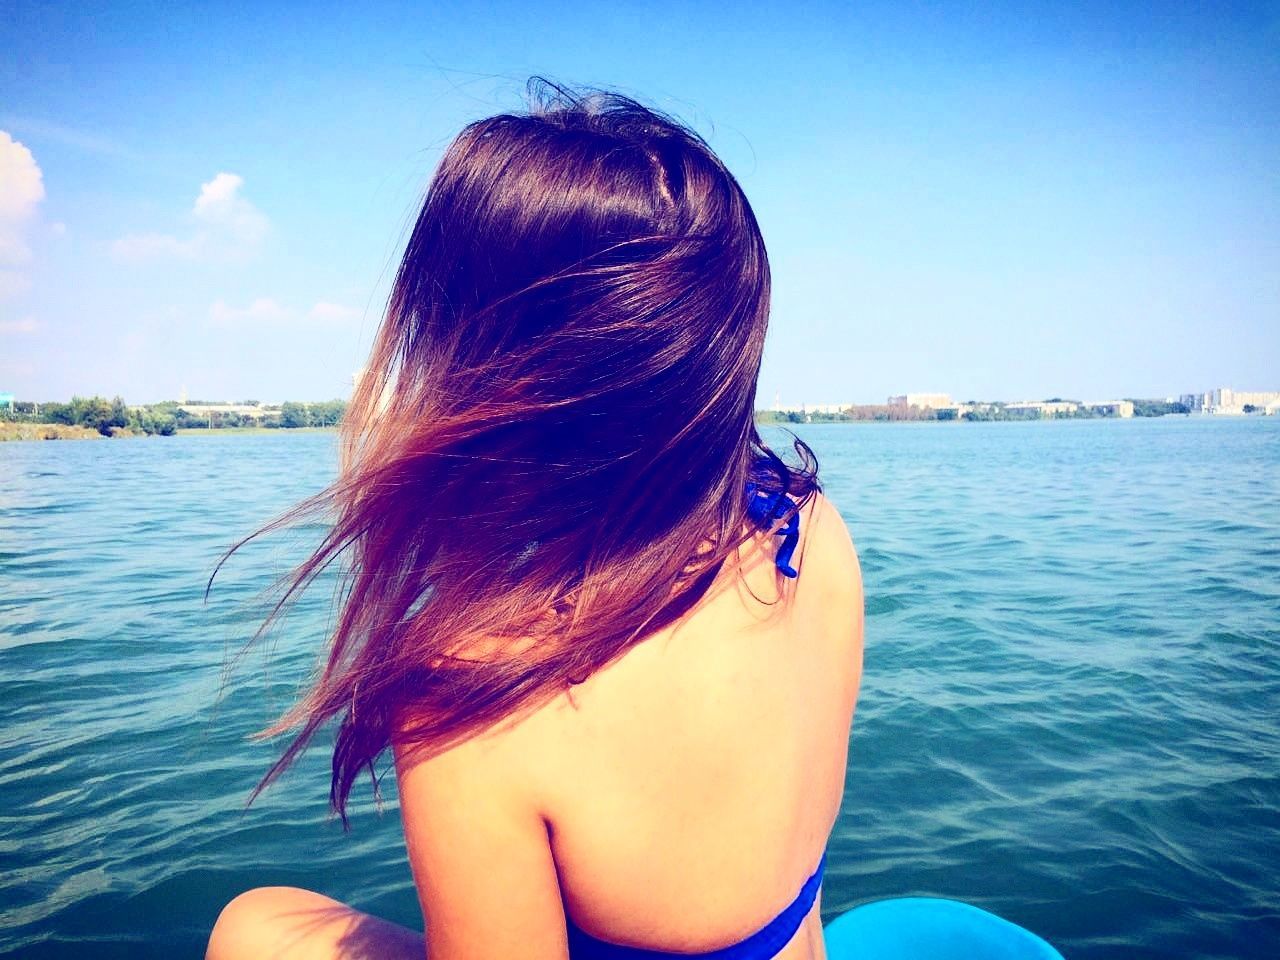 rear view, real people, water, sea, one person, leisure activity, lifestyles, sky, day, outdoors, nature, young women, women, young adult, nautical vessel, beauty in nature, close-up